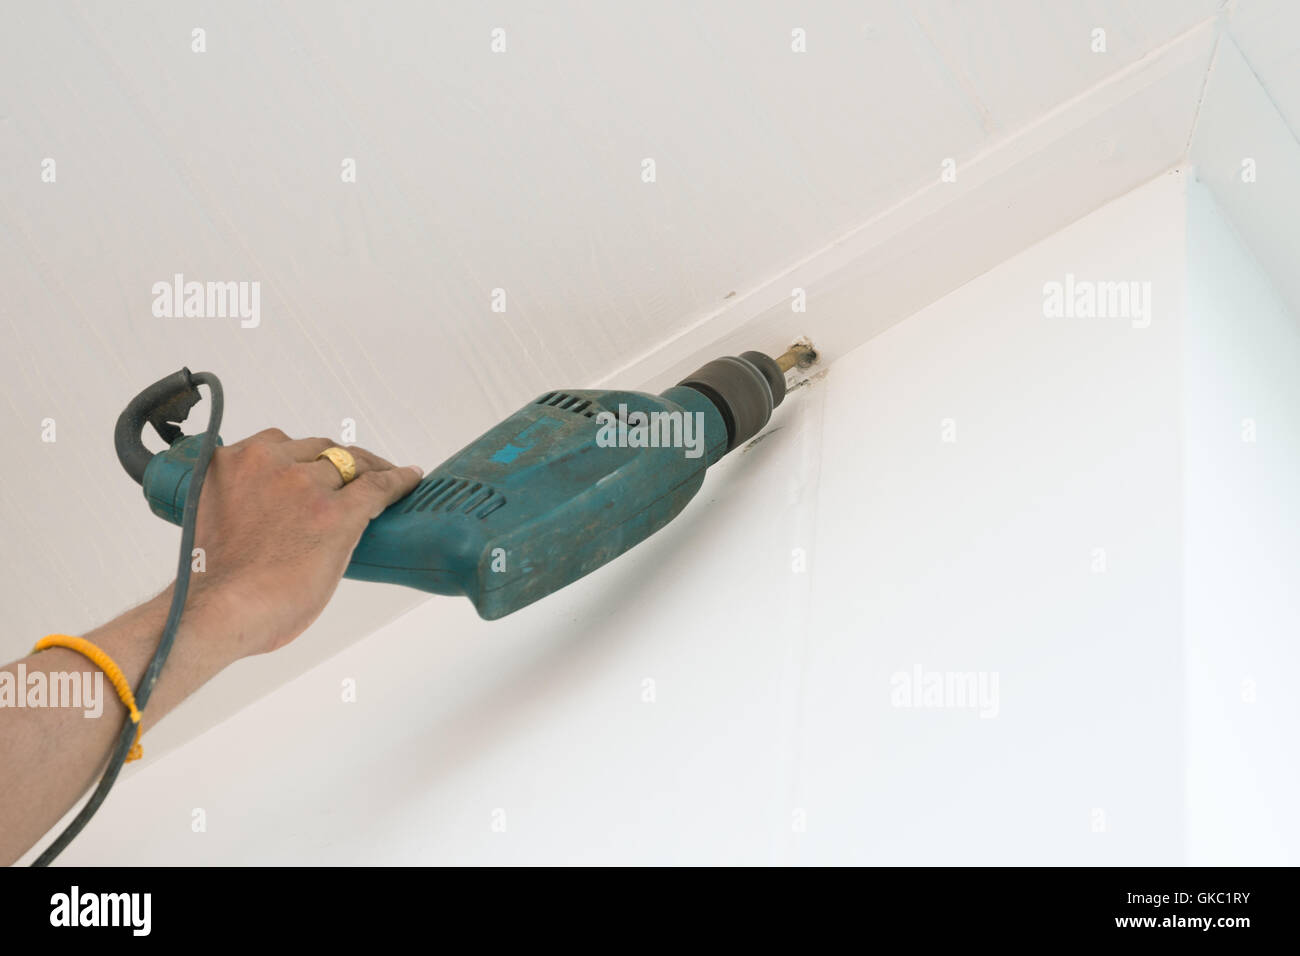 drilling a ceiling with an electric drill Stock Photo